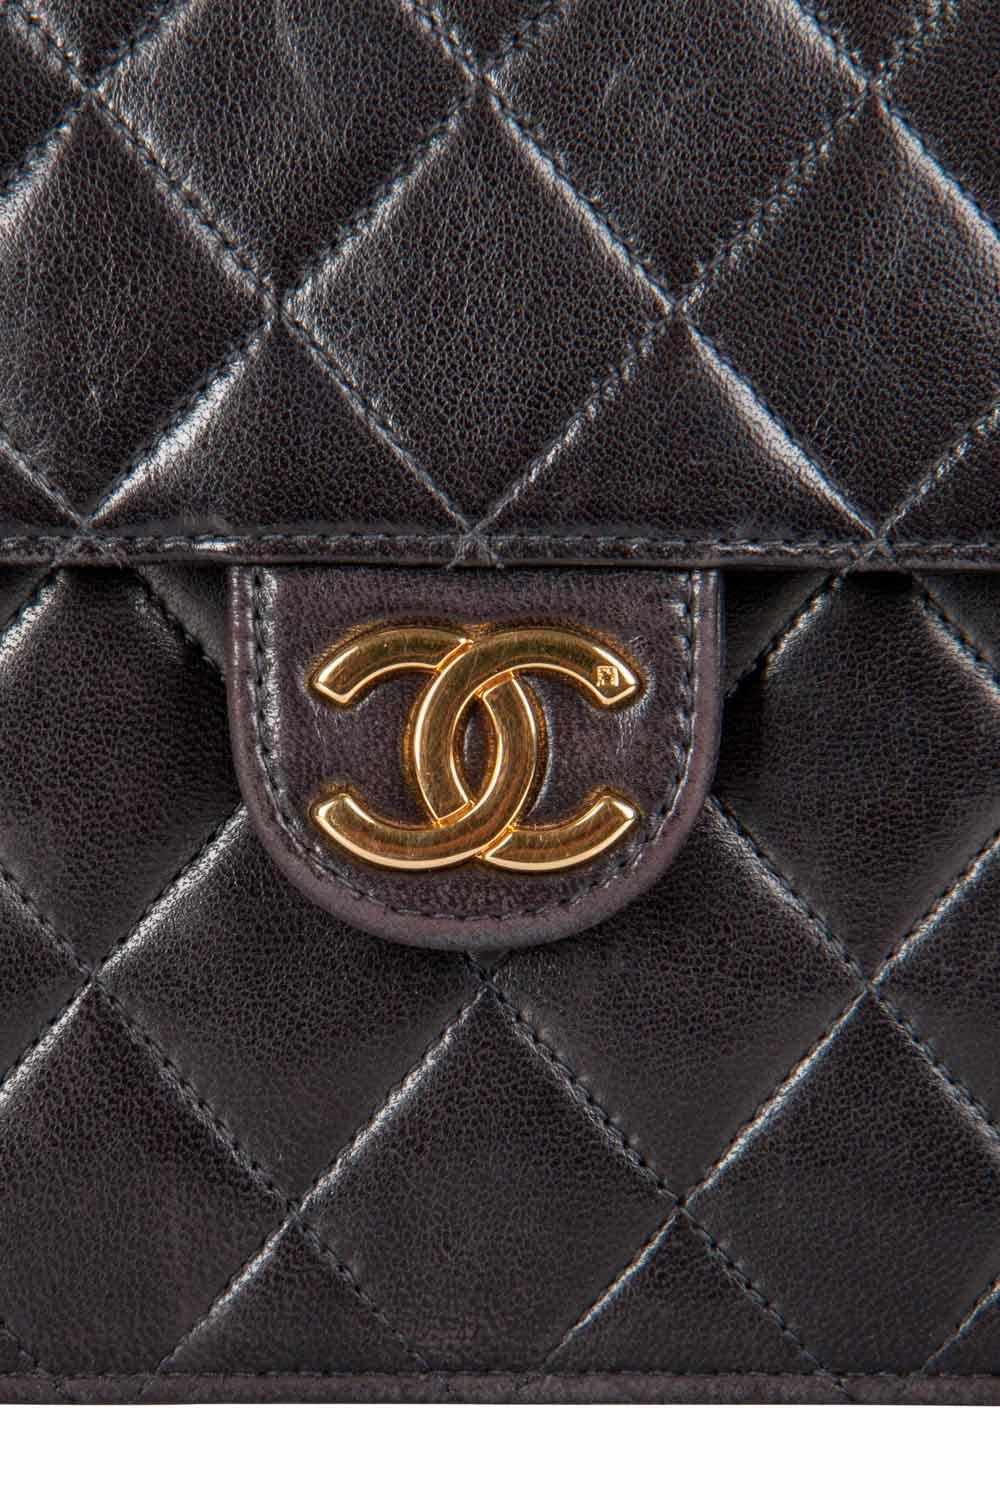 Chanel Black Quilted Leather Small Vintage Classic Single Flap Bag 2